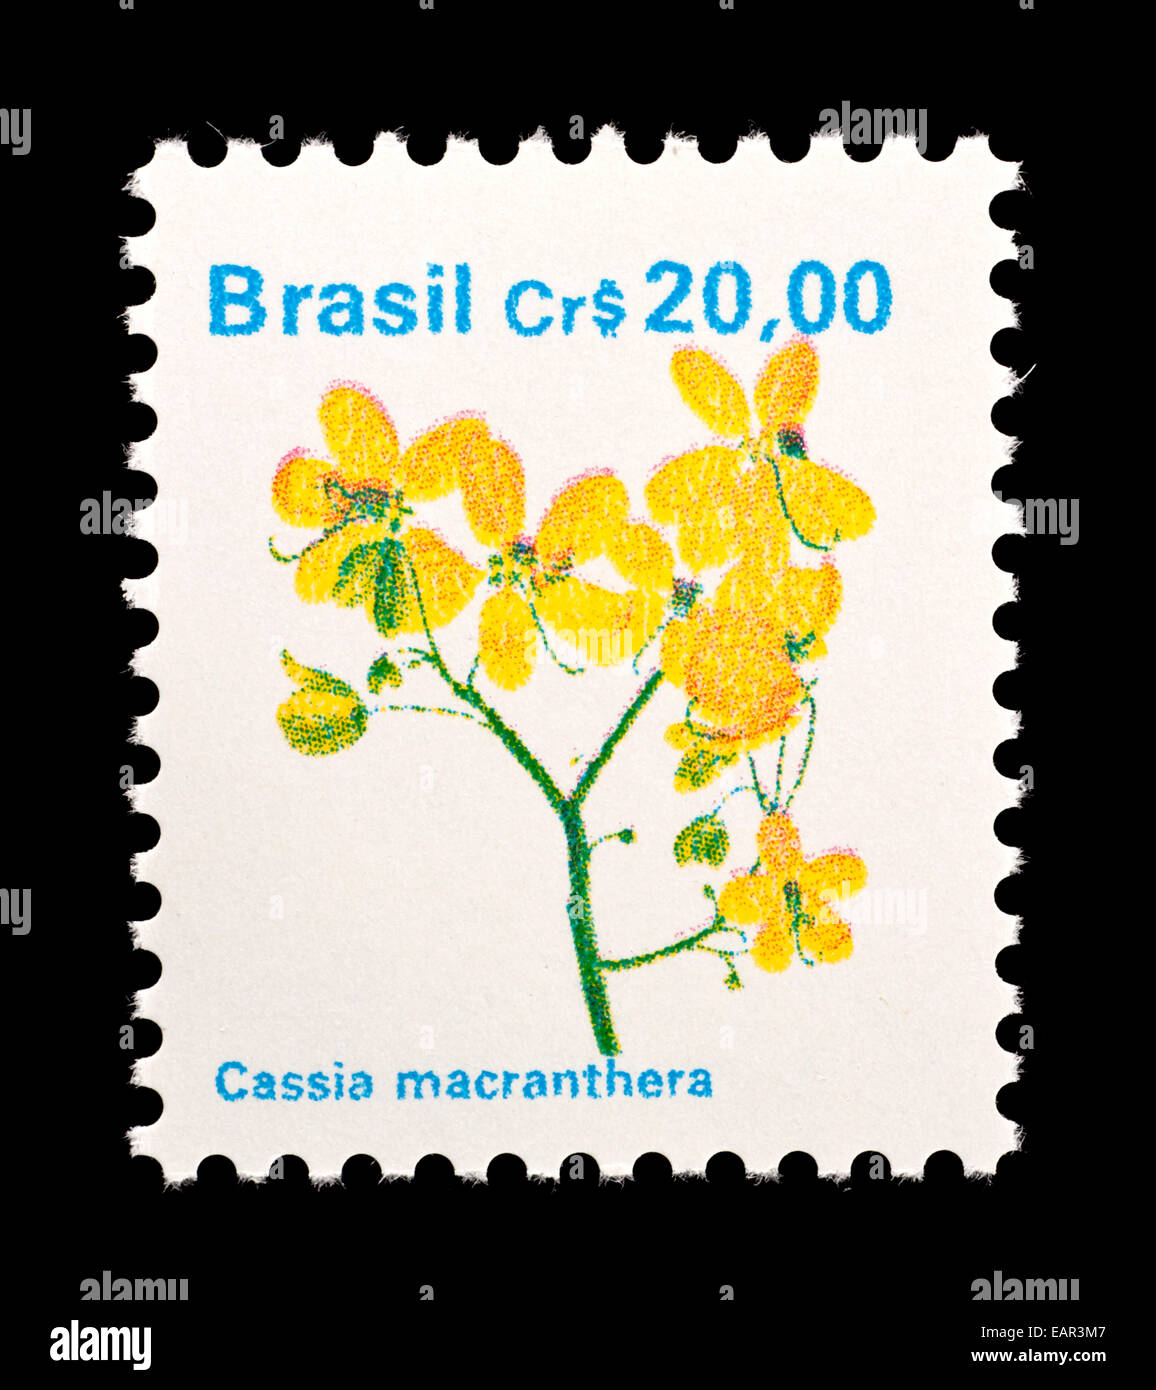 Postage stamp from Brazil depicting cassia (Cassia macranthera) Stock Photo